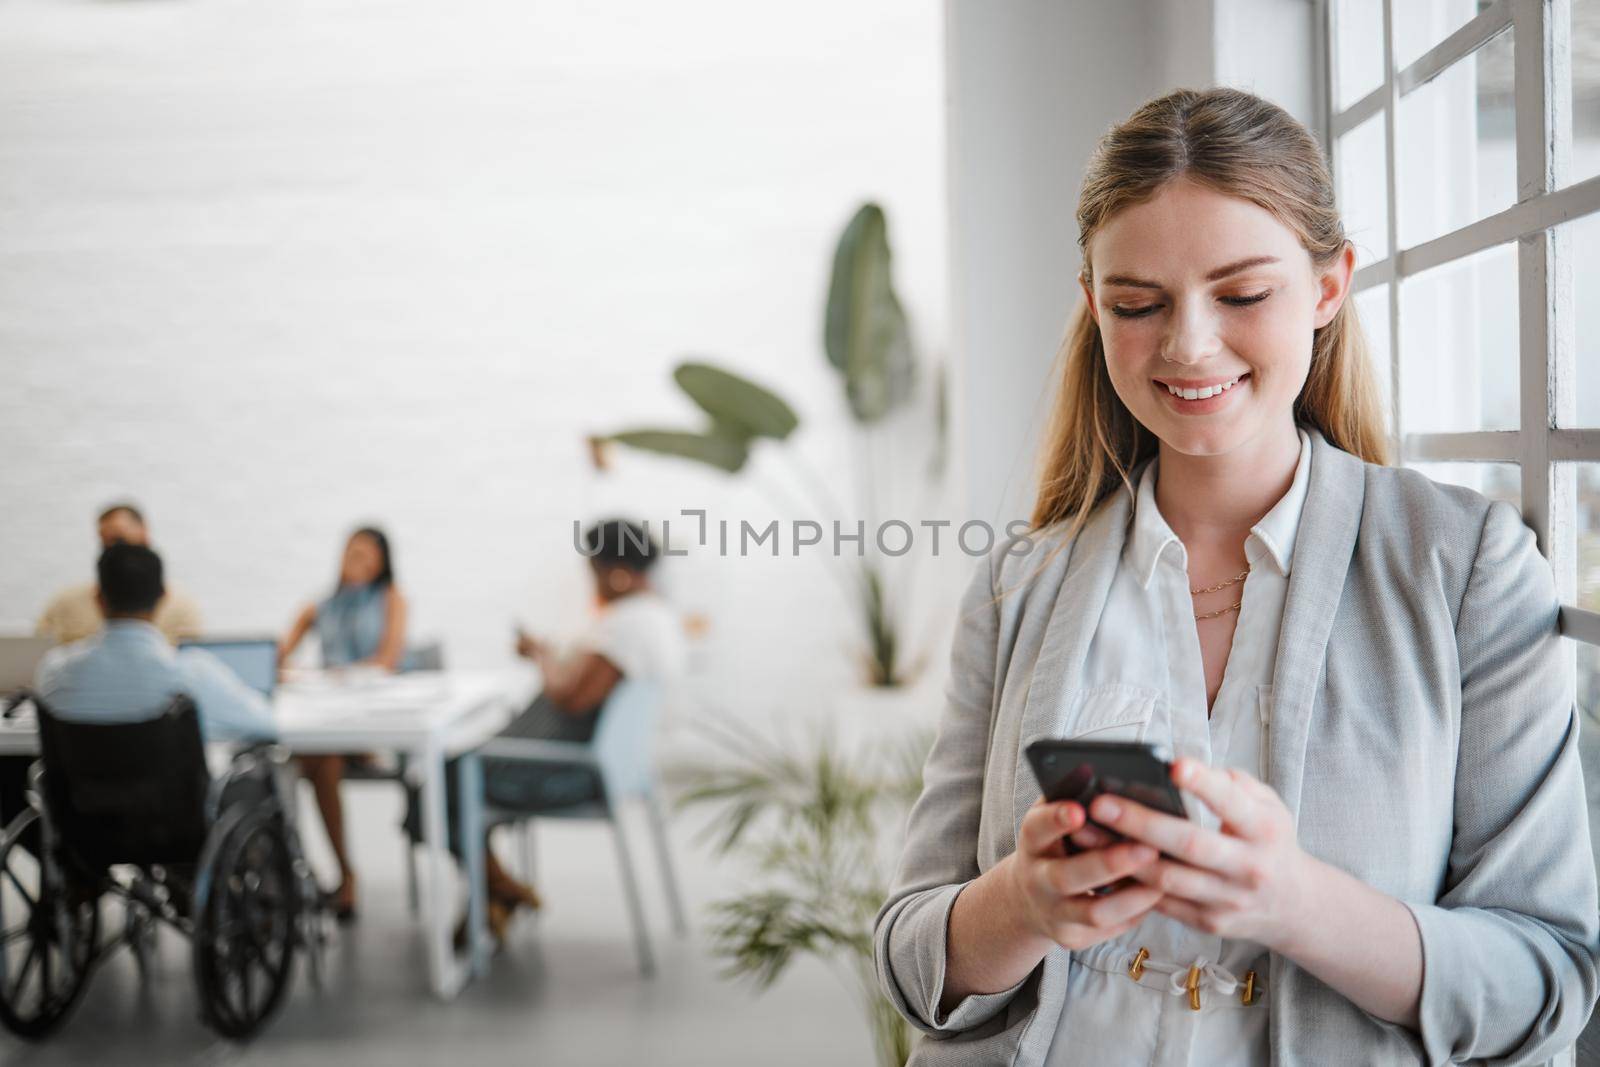 Phone, networking and communication with a business woman on social media in an office for a meeting with a team in the background. Advertising, marketing and teamwork with a worker typing a message.